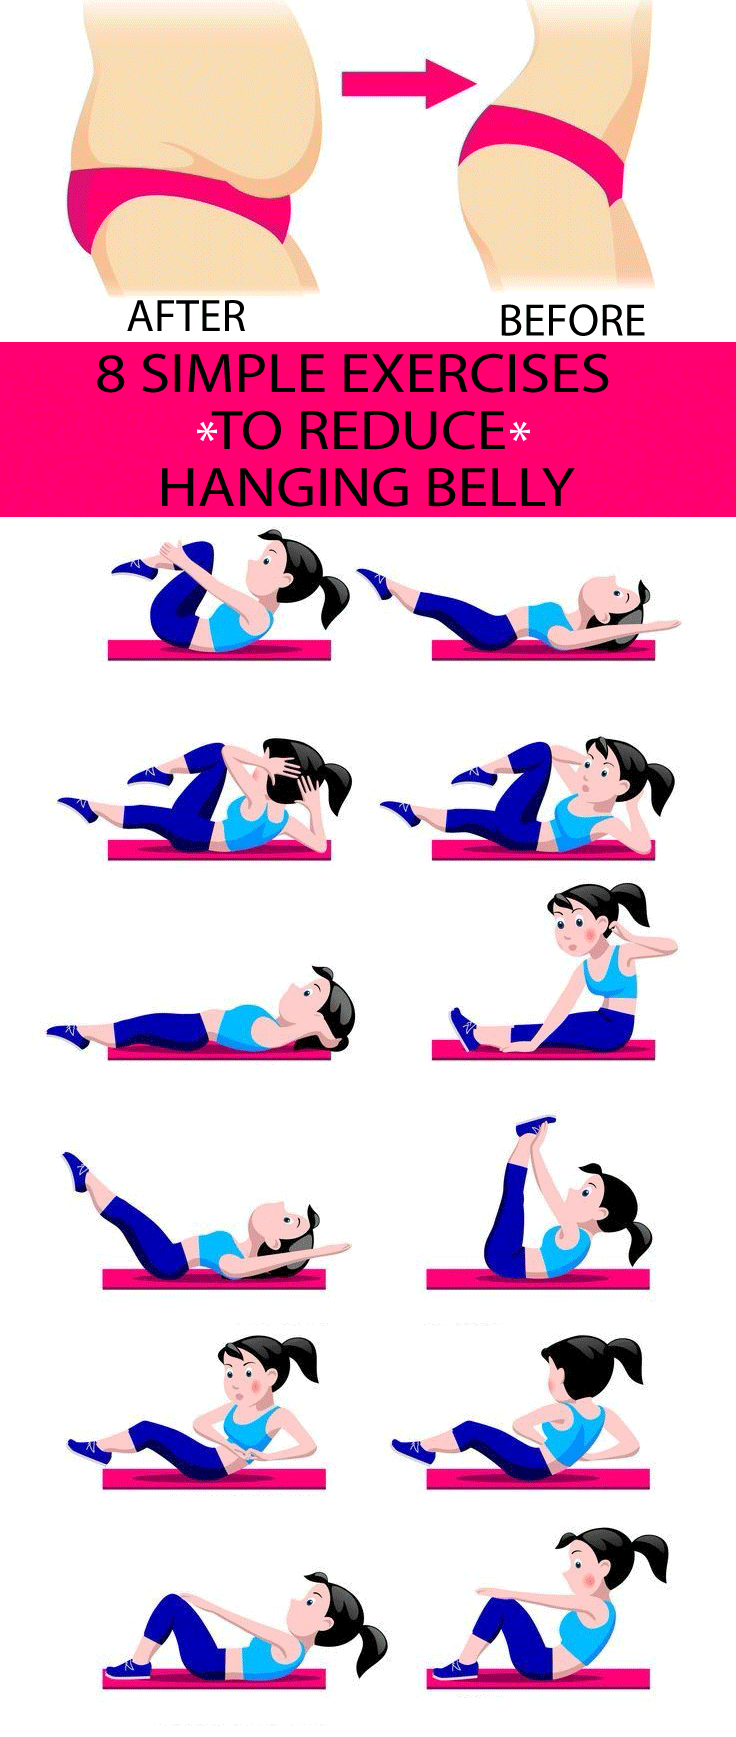 8 Simple Exercises To Reduce Hanging Belly Fat - Healthy Lifestyle